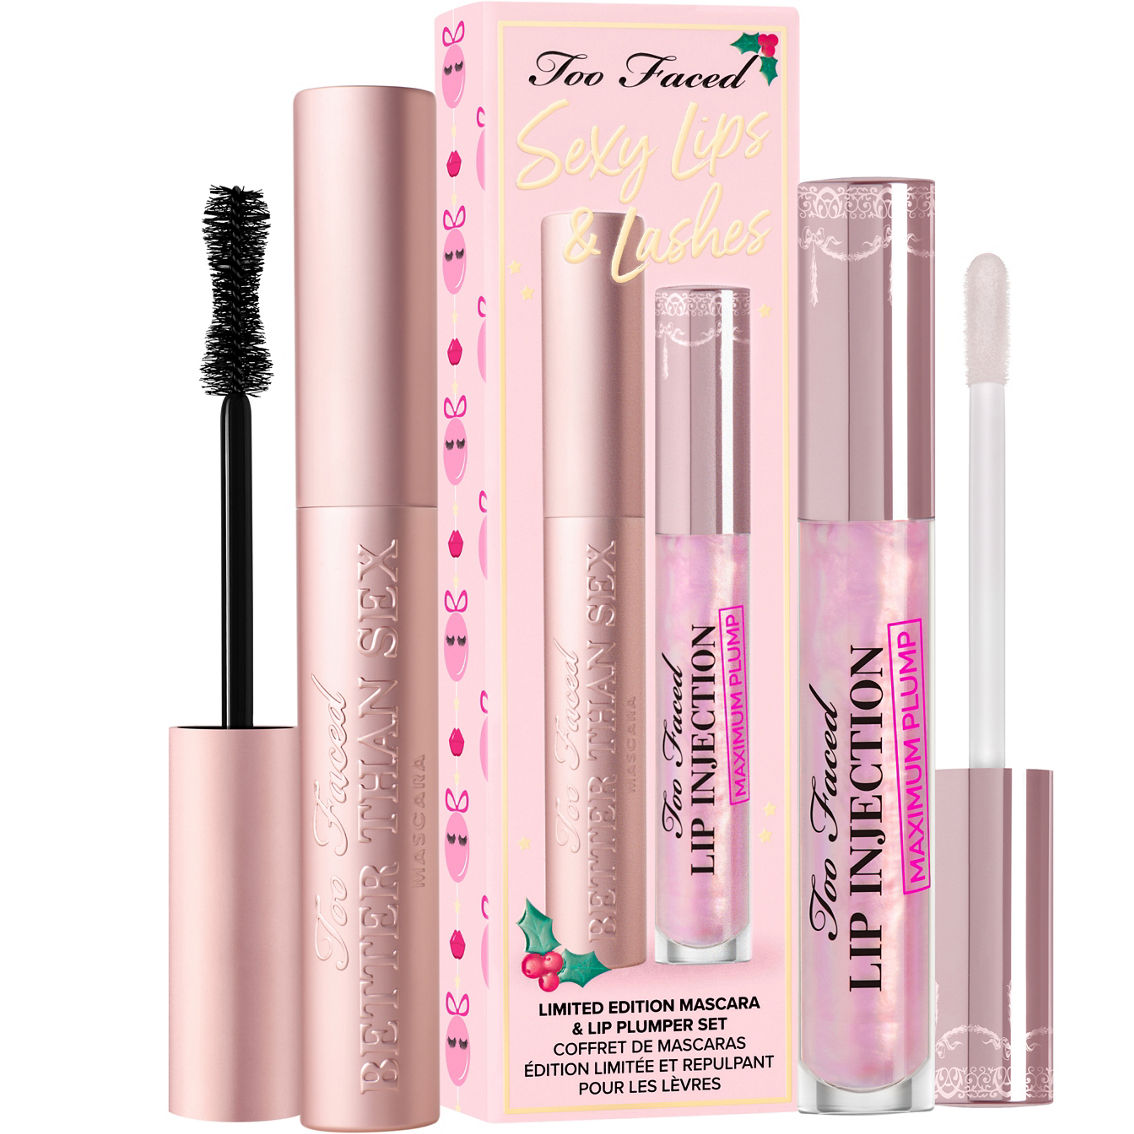 Too Faced Sexy Lips and Lashes Mascara and Lip Plumper Set